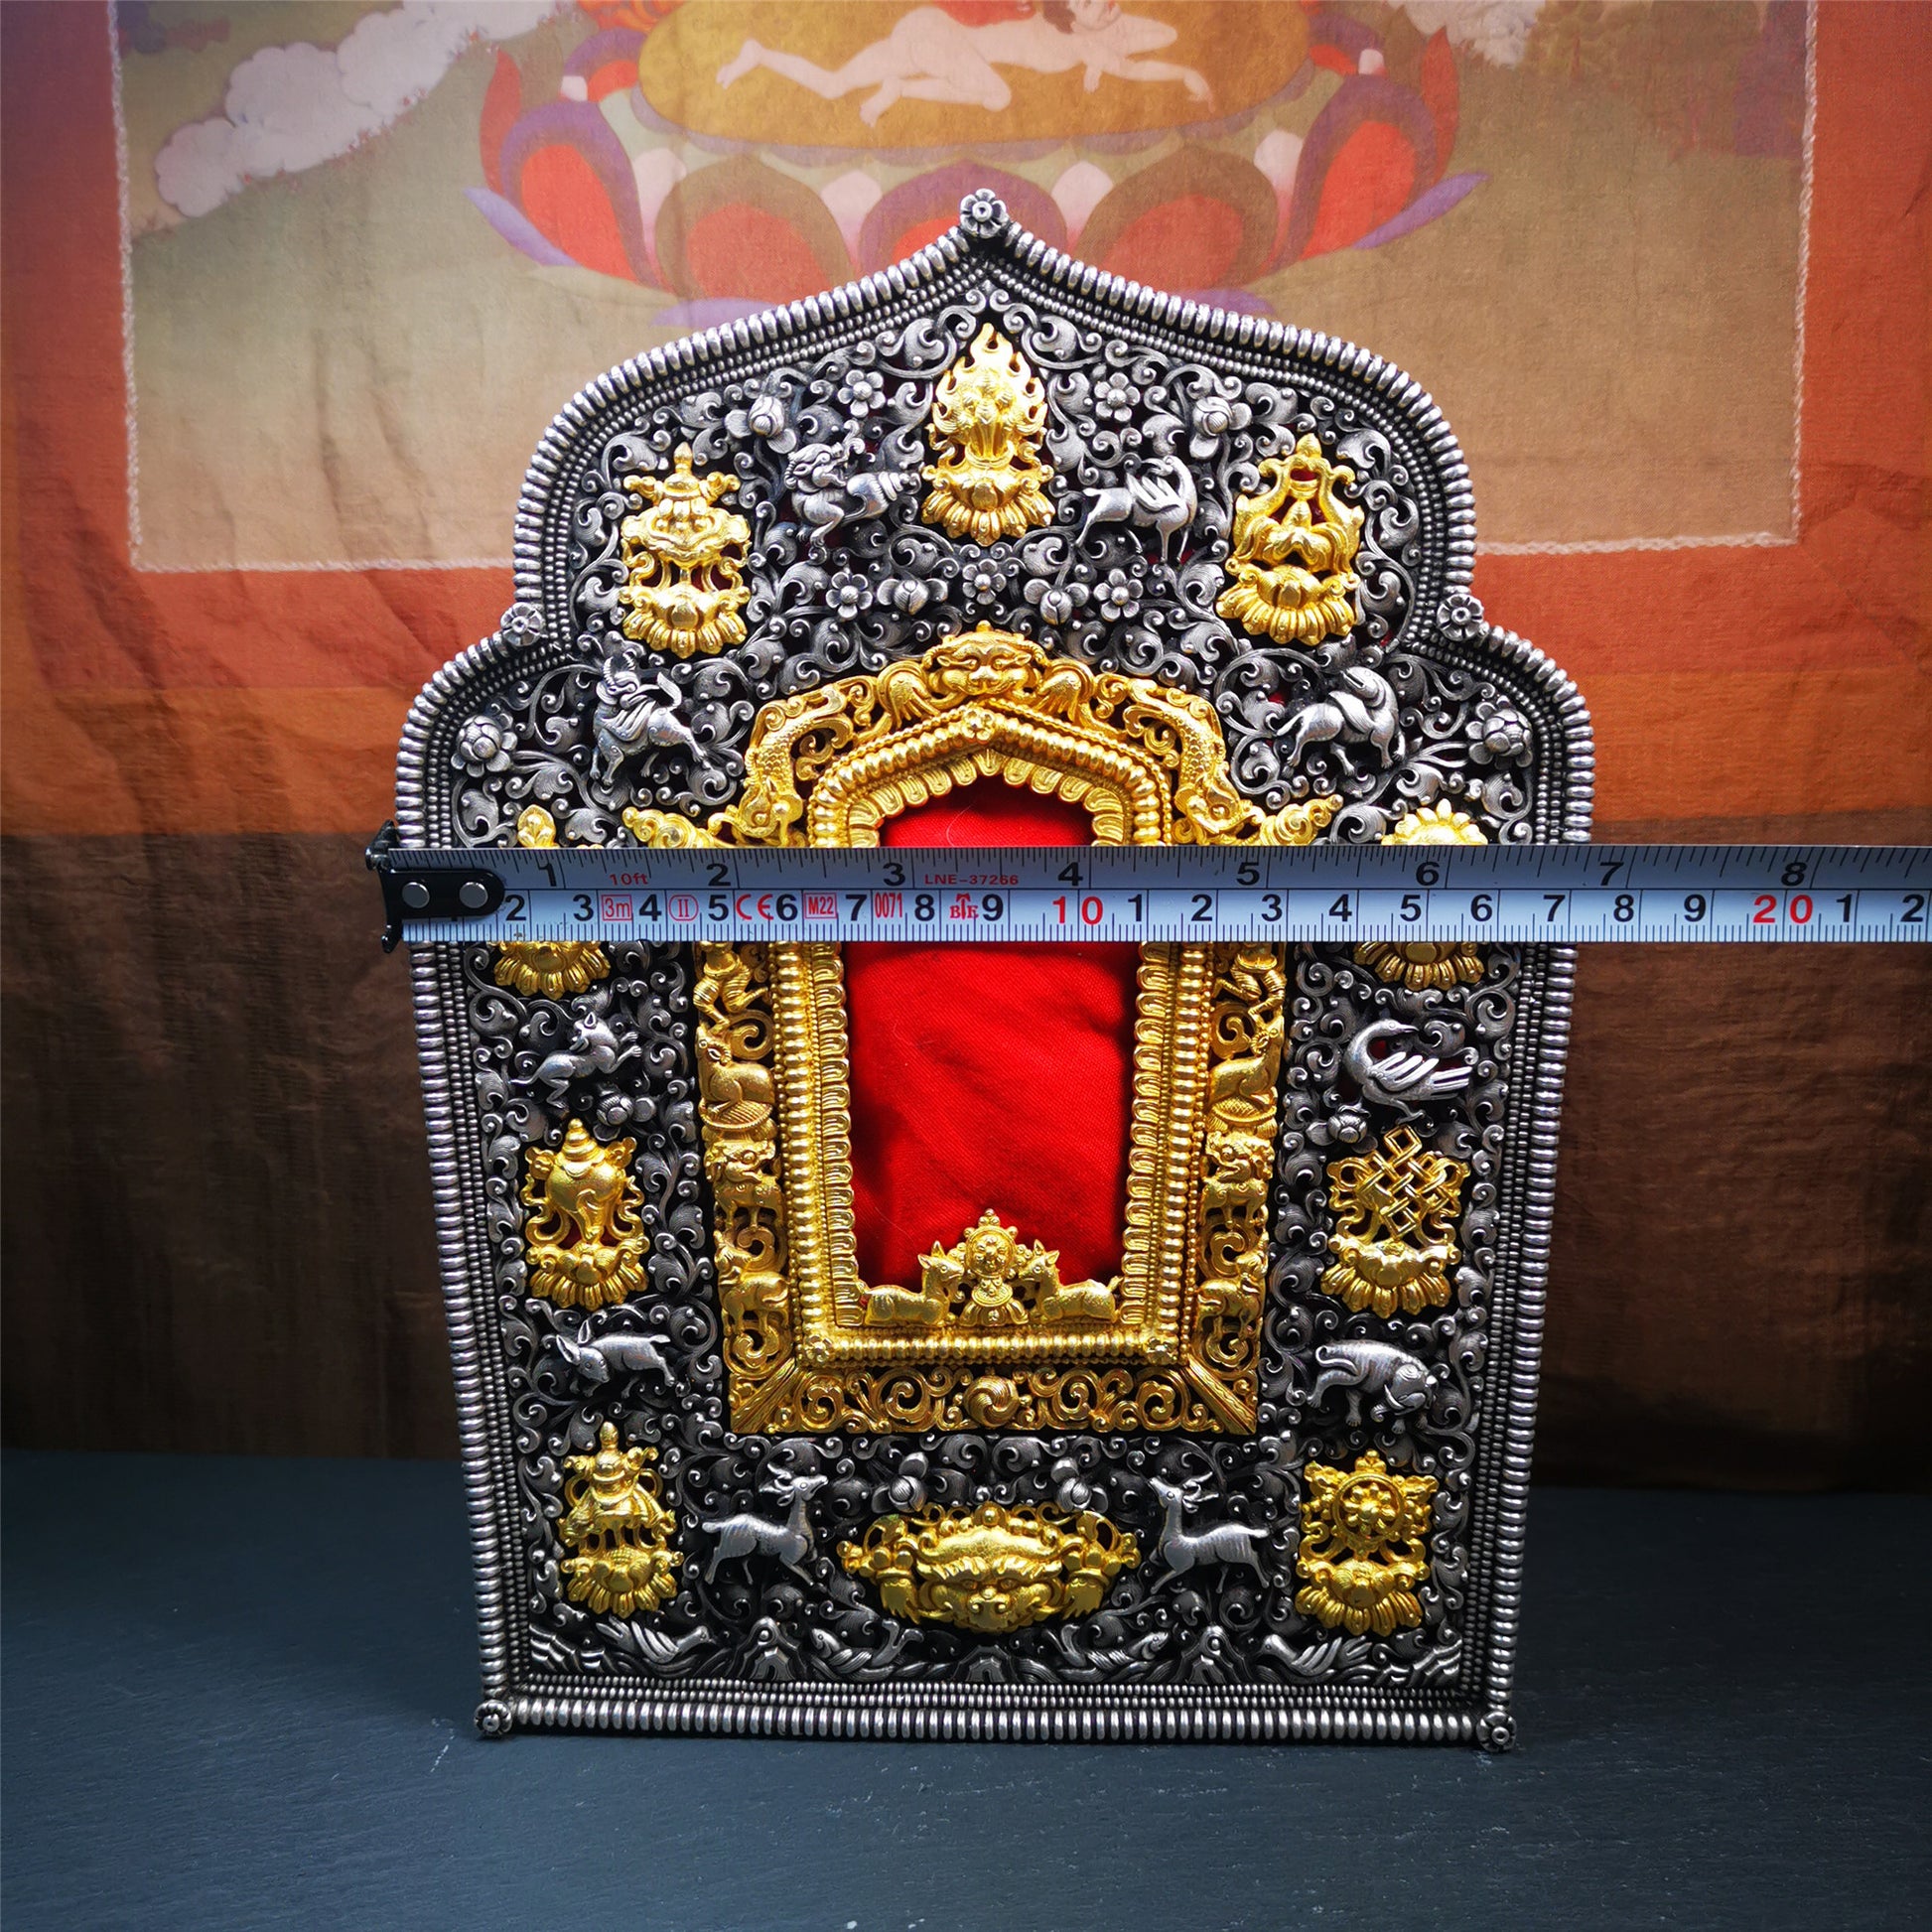 This large Gau shrine was handcrafted by Tibetan artisans from Hepo Township, Baiyu County. Each exquisite pattern on it is meticulously hand-carved,and it is embellished with the technique of gold inlay, with pure silver inlaid on the red copper material and gold-plated on the pure silver material.Its theme is Astamangala, and it features 10 mythical creatures traversing a silver-patterned meadow. The interior space of the box is quite spacious, large enough to accommodate a 12 * 8 cm Buddha statue.